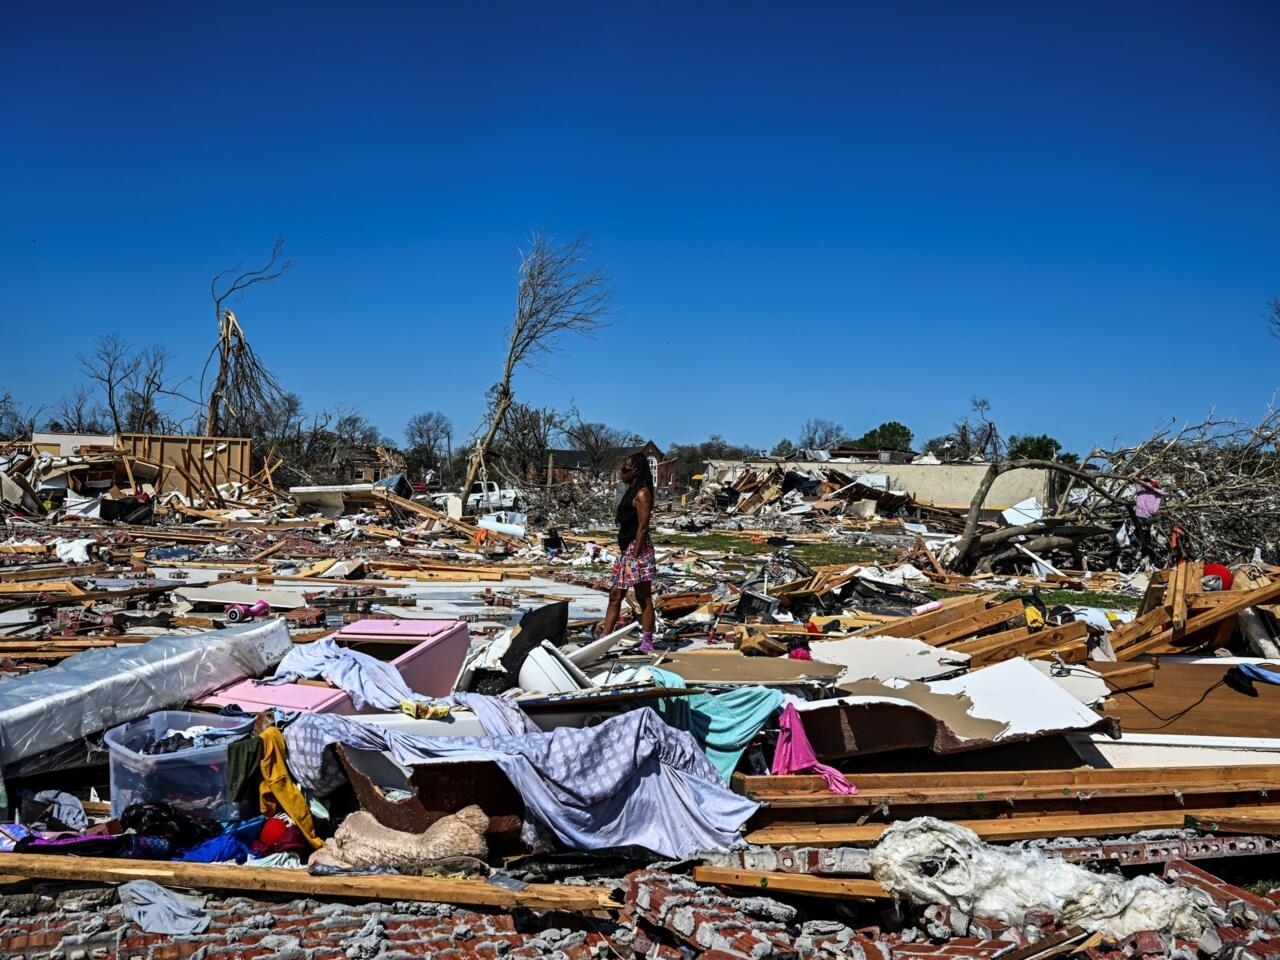 US: Tornado-ravaged Mississippi faces MORE extreme weather after deadly storms killed at least 26